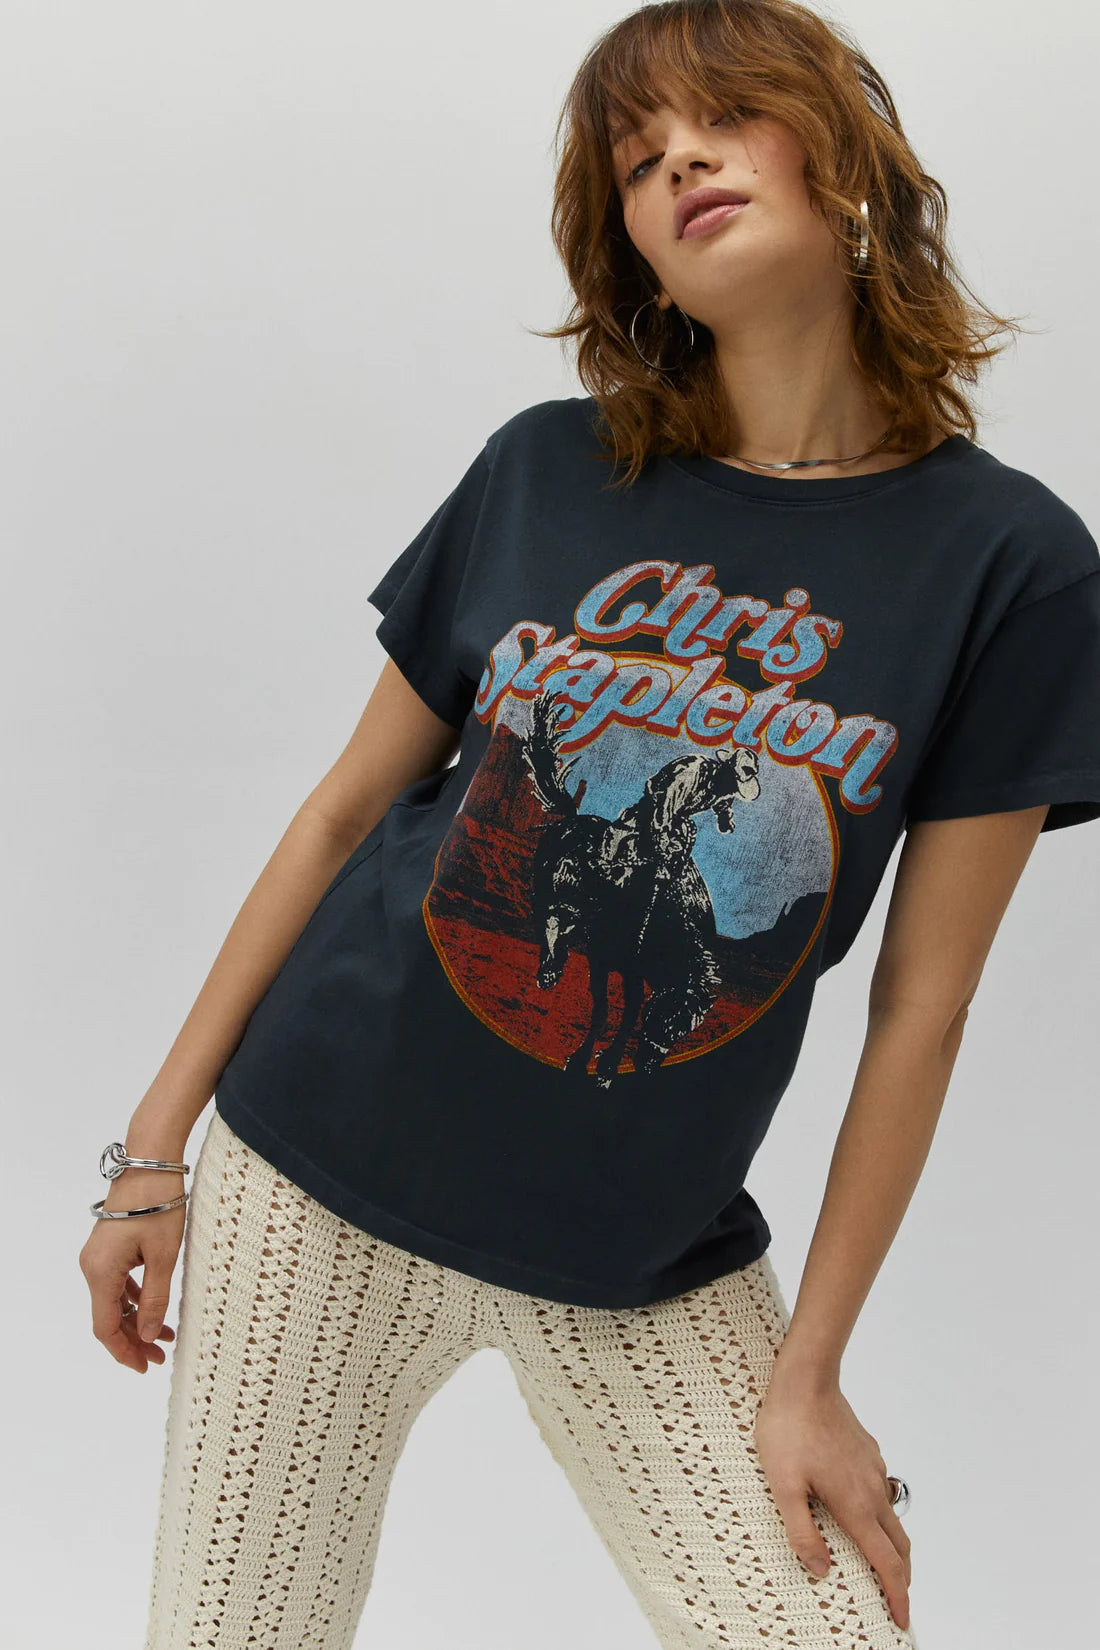 DayDreamer CHRIS STAPLETON HORSE AND CANYONS TOUR TEE